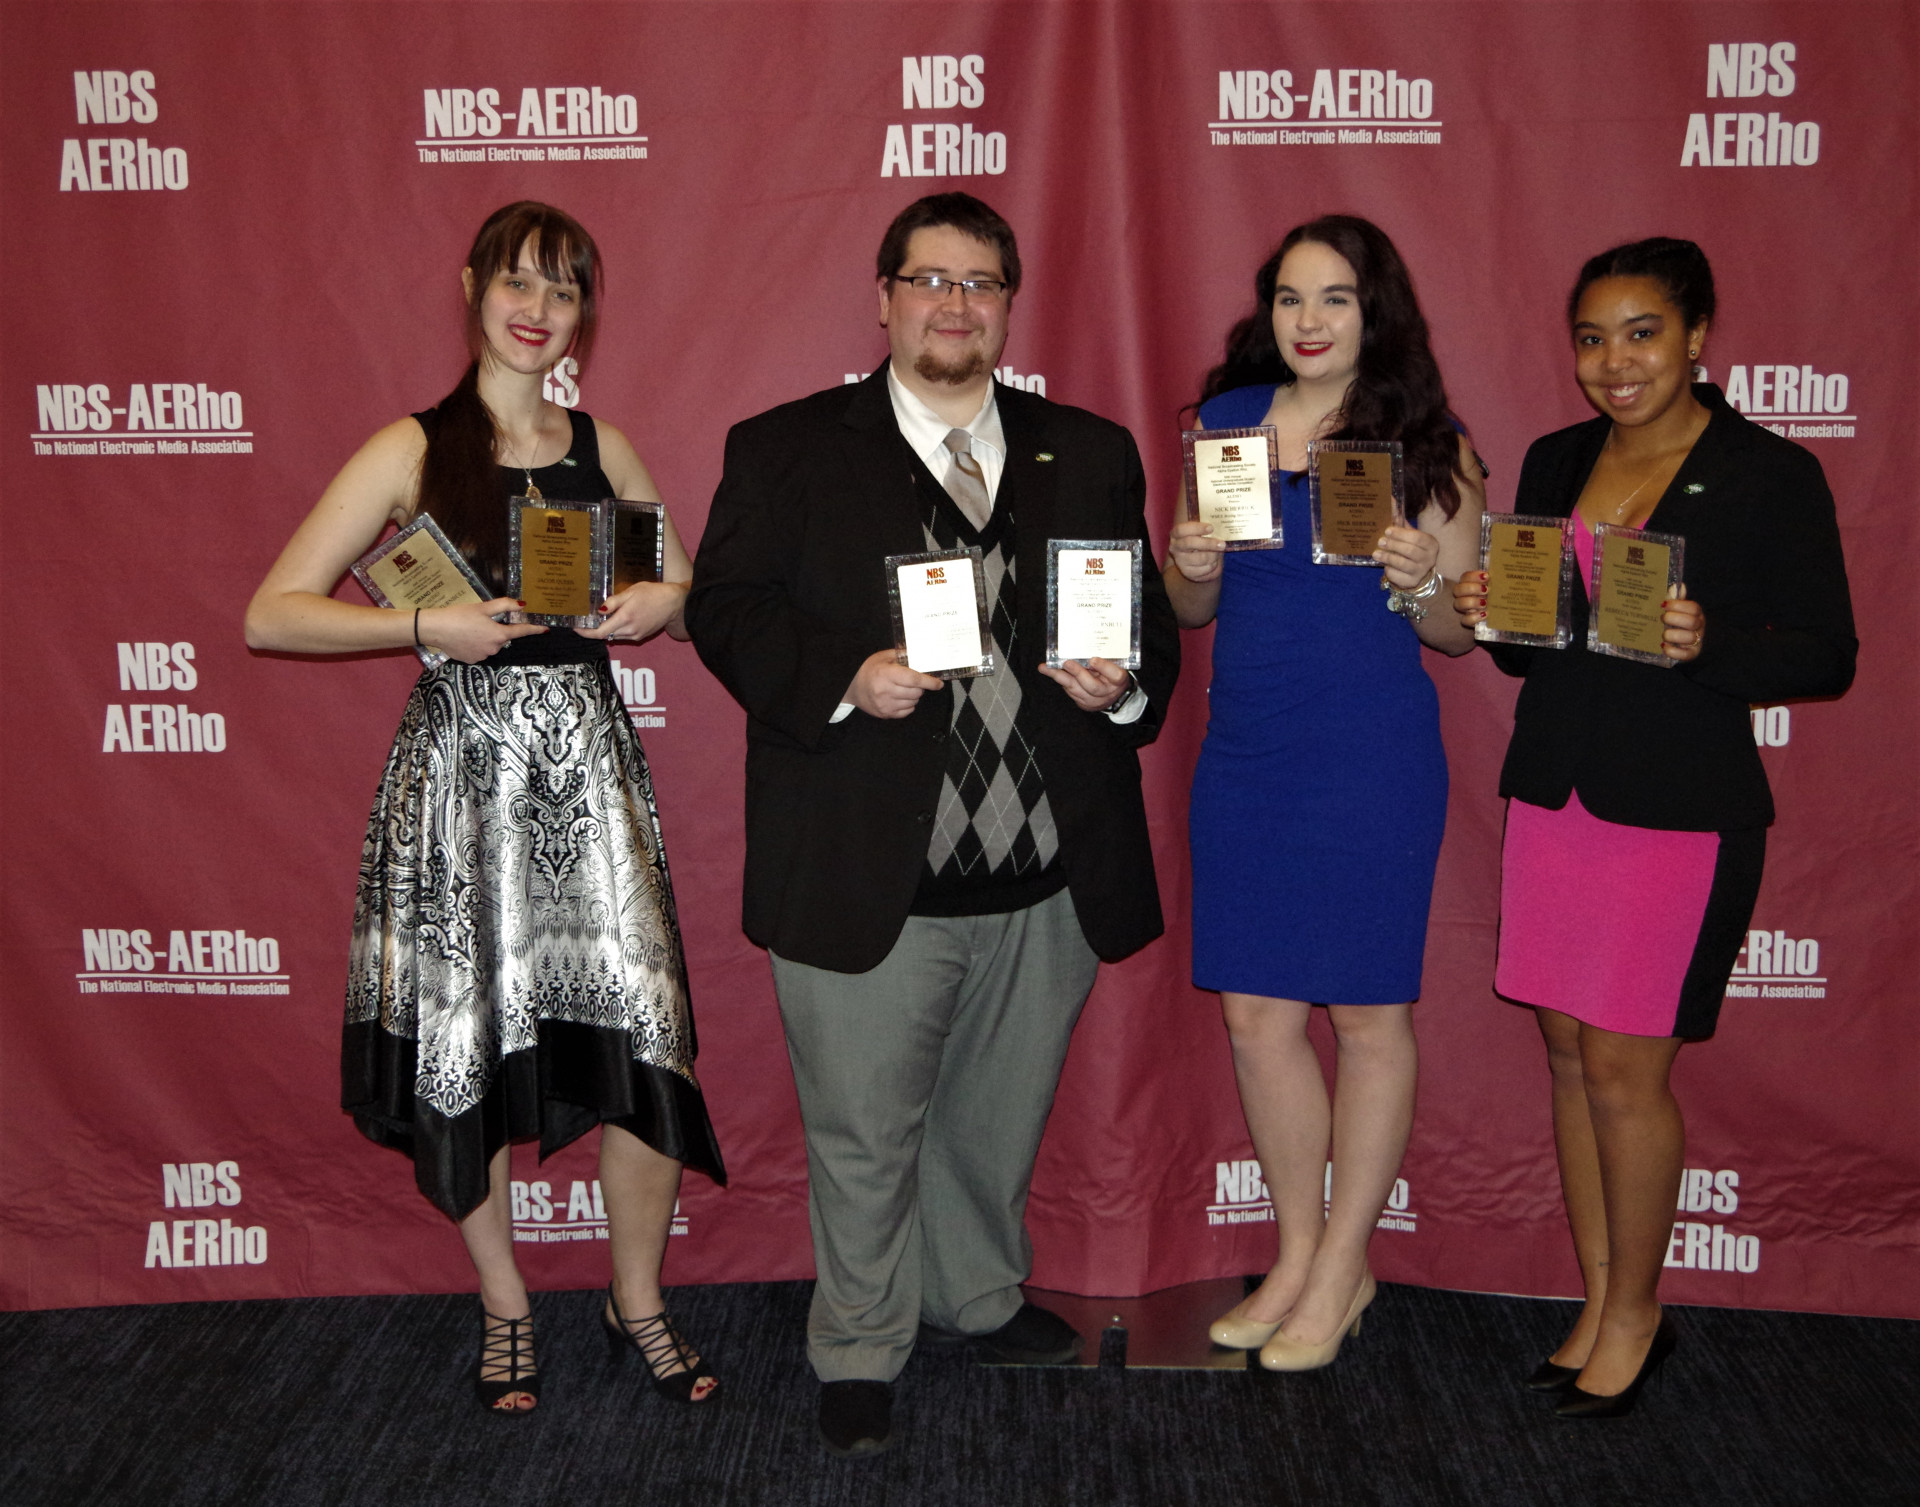 NBS-AERho award recipients pictured from left to right are: Monica Zalaznik (Online Director), Adam Rogers (Executive Director), Kyra Biscarner (News Director) and Sage Shavers (Traffic Director).